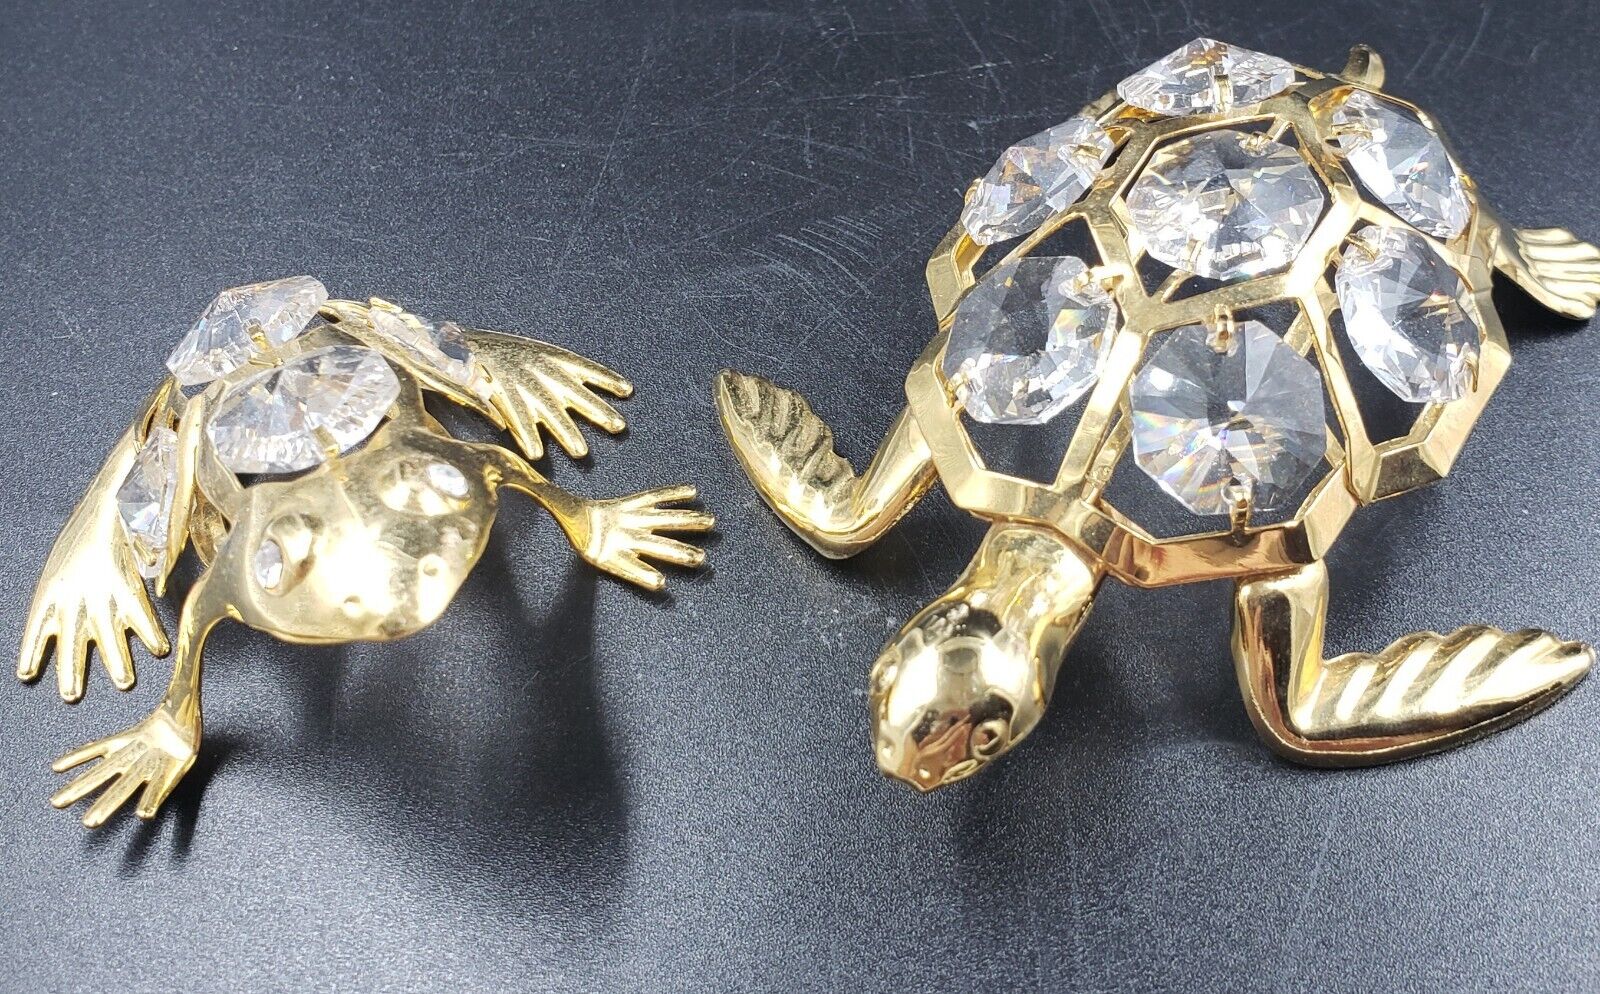 **Crystal Temptations 24kt Gold Plated Turtle & Frog Lightweight Figurines**